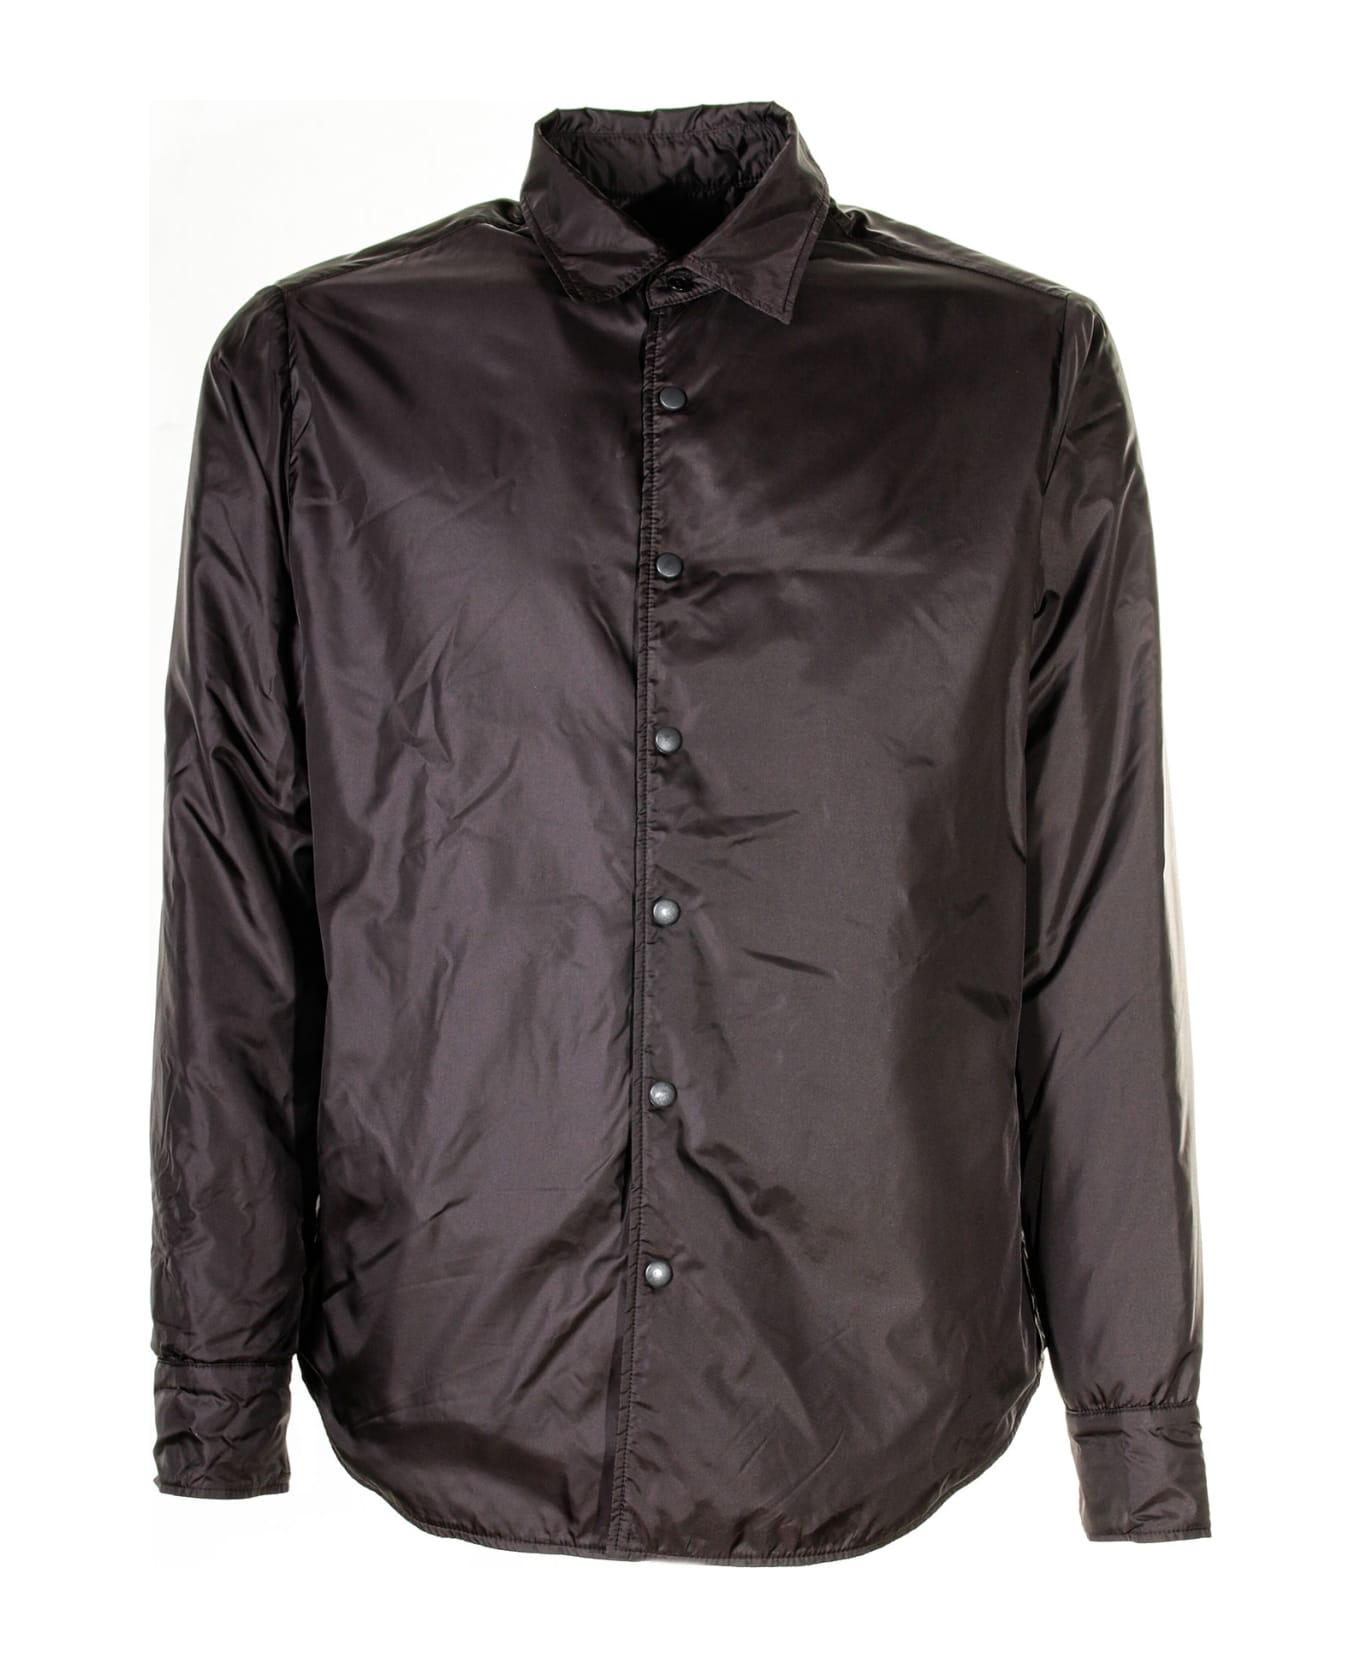 Aspesi Shirt Jacket With Buttons - BROWN MARRONE